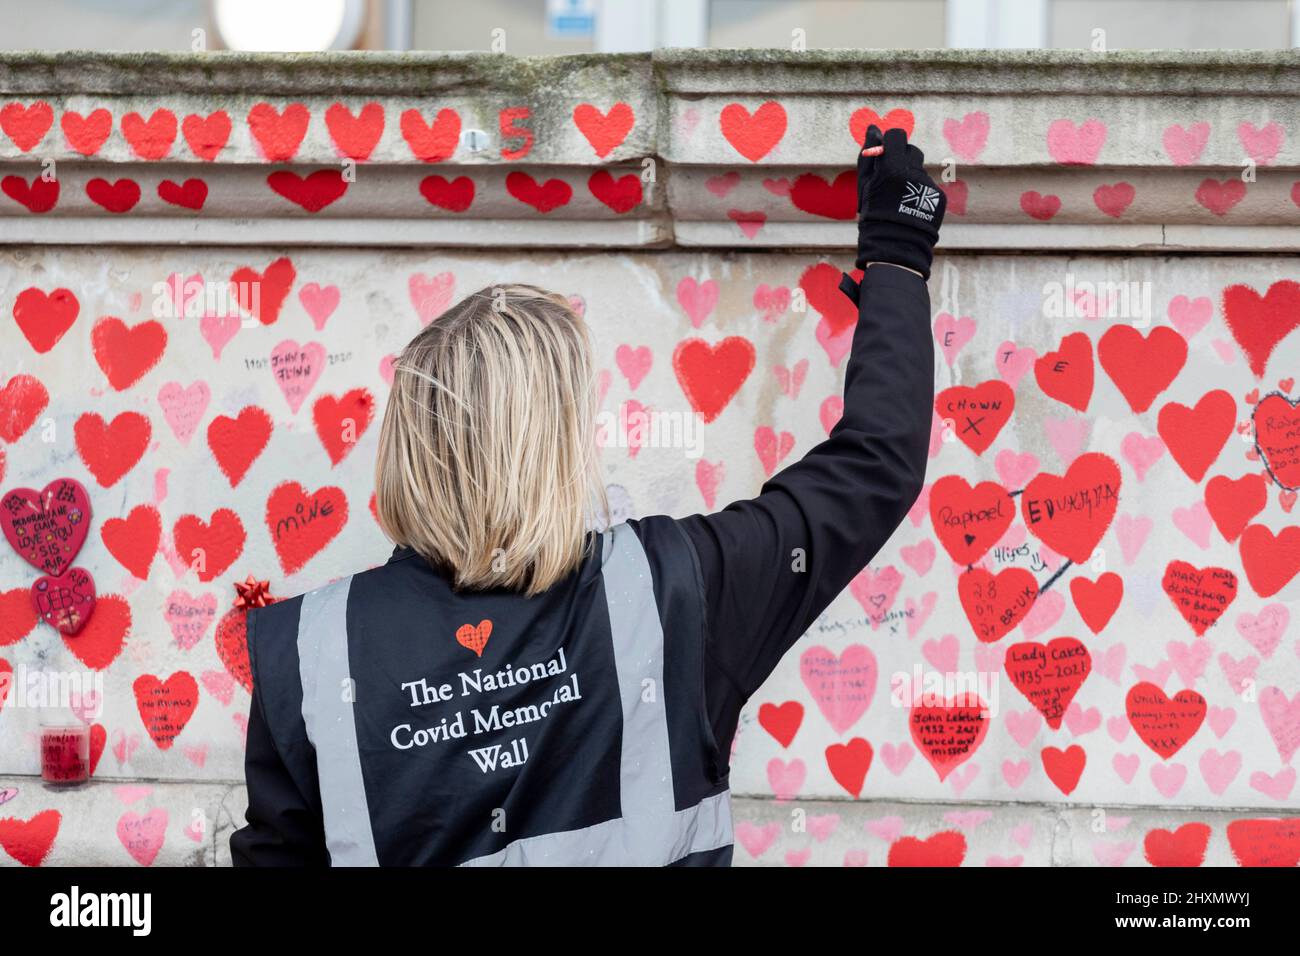 29th March 2022 marks the one year anniversary of the first heart being drawn on the Covid 19 National Memorial Wall. On the day, the Covid 19 Bereave Stock Photo